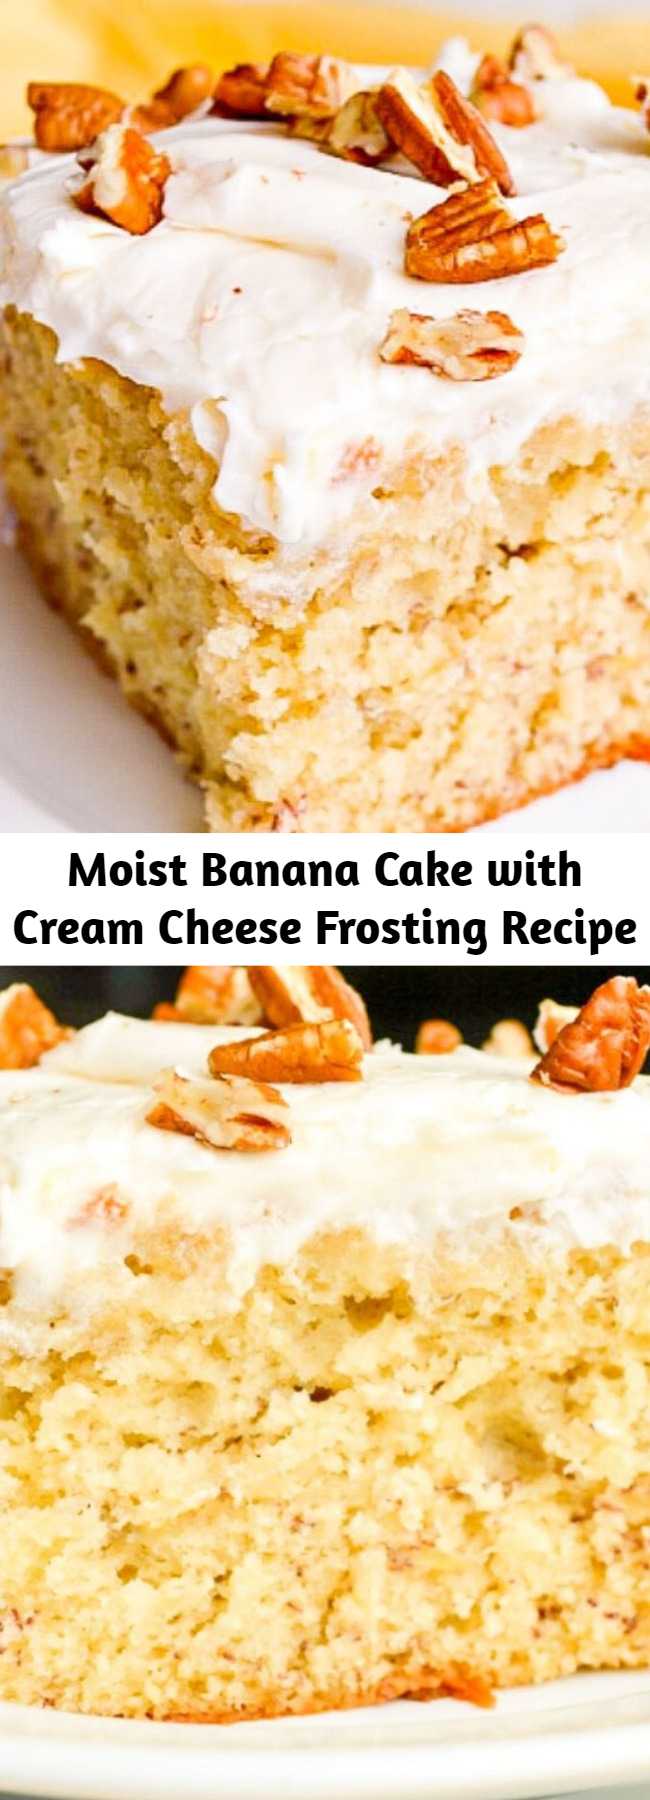 Moist Banana Cake with Cream Cheese Frosting Recipe - Banana Cake with Cream Cheese Frosting combines common pantry ingredients into a tender, moist cake with tons of banana flavor and a tangy, sweet frosting!